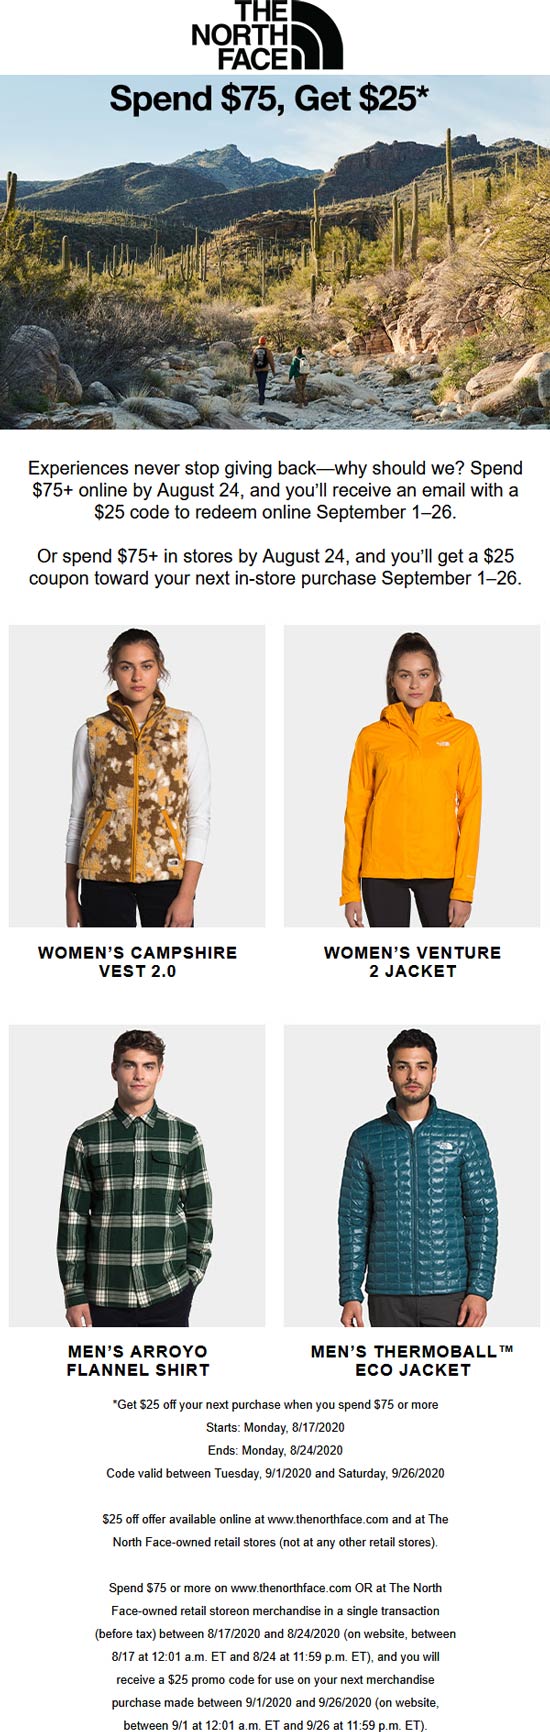 The North Face stores Coupon  $25 store credit on $75 spent at The North Face, ditto online #thenorthface 